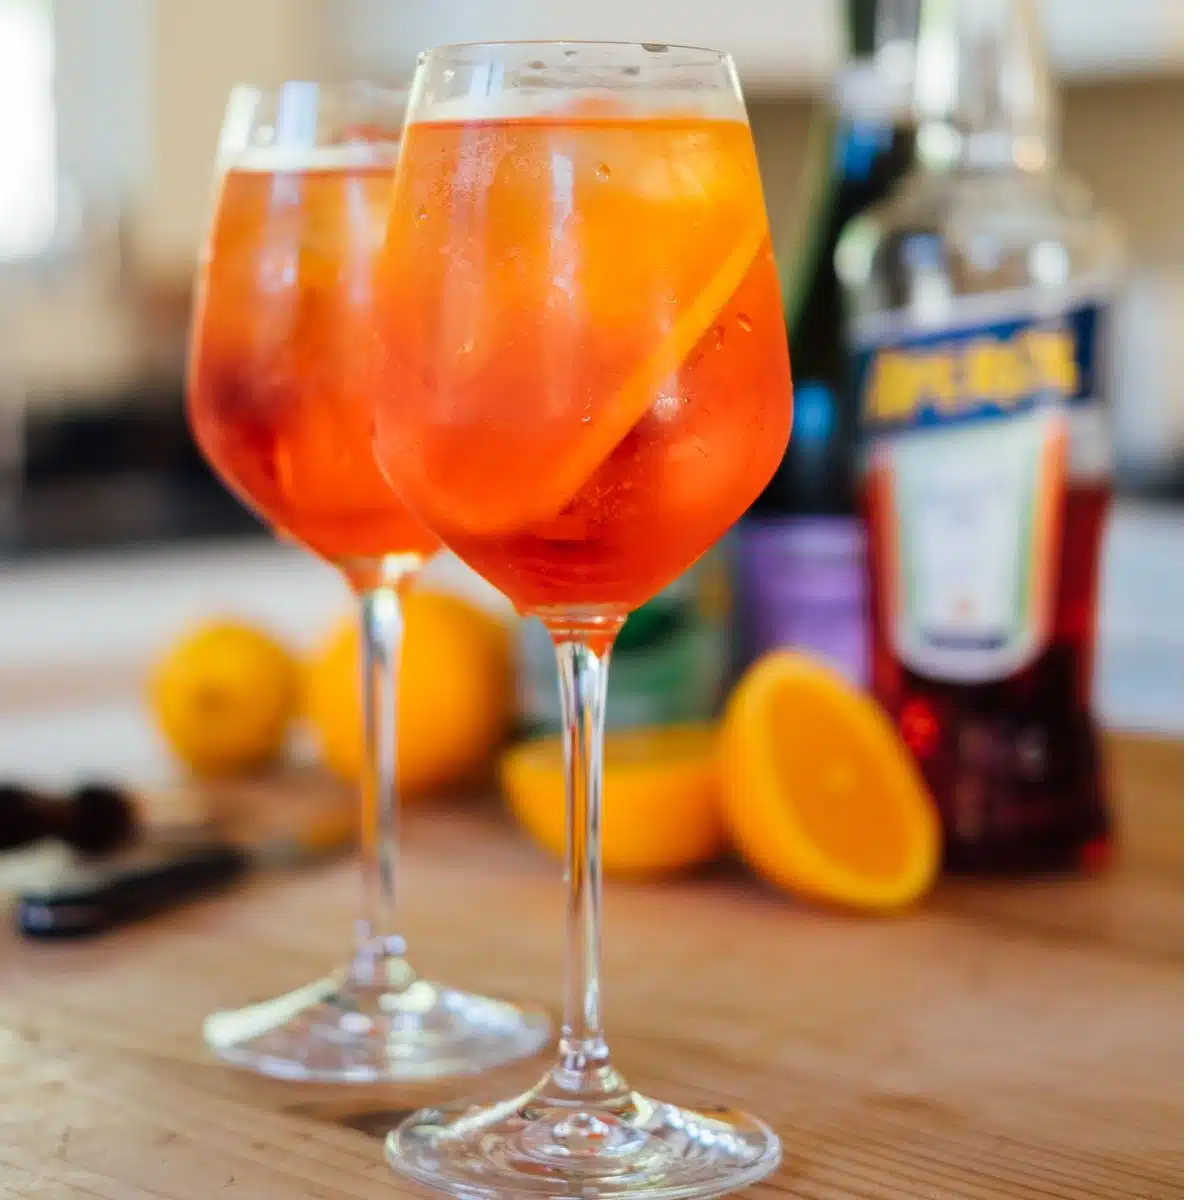 Two stemmed glassed filled with Aperol Spritz.